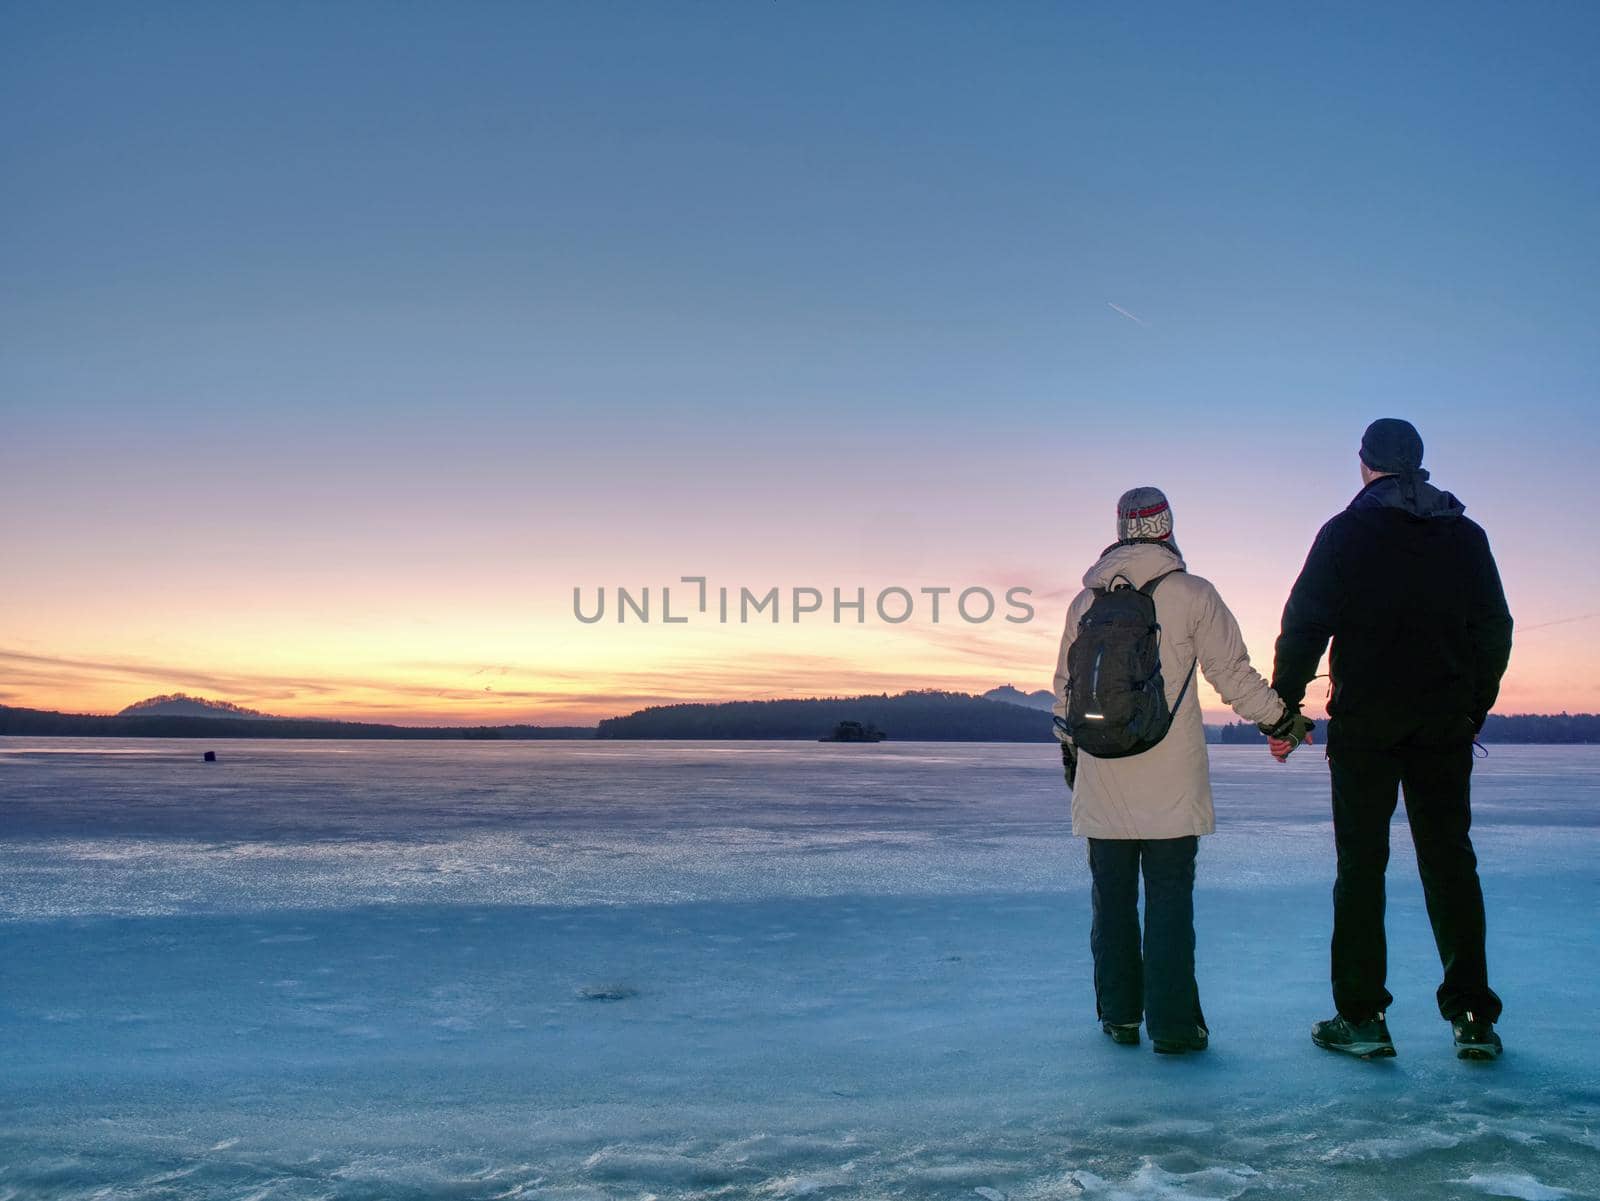 Couple has fun during winter walk on ice of frozen lake by rdonar2